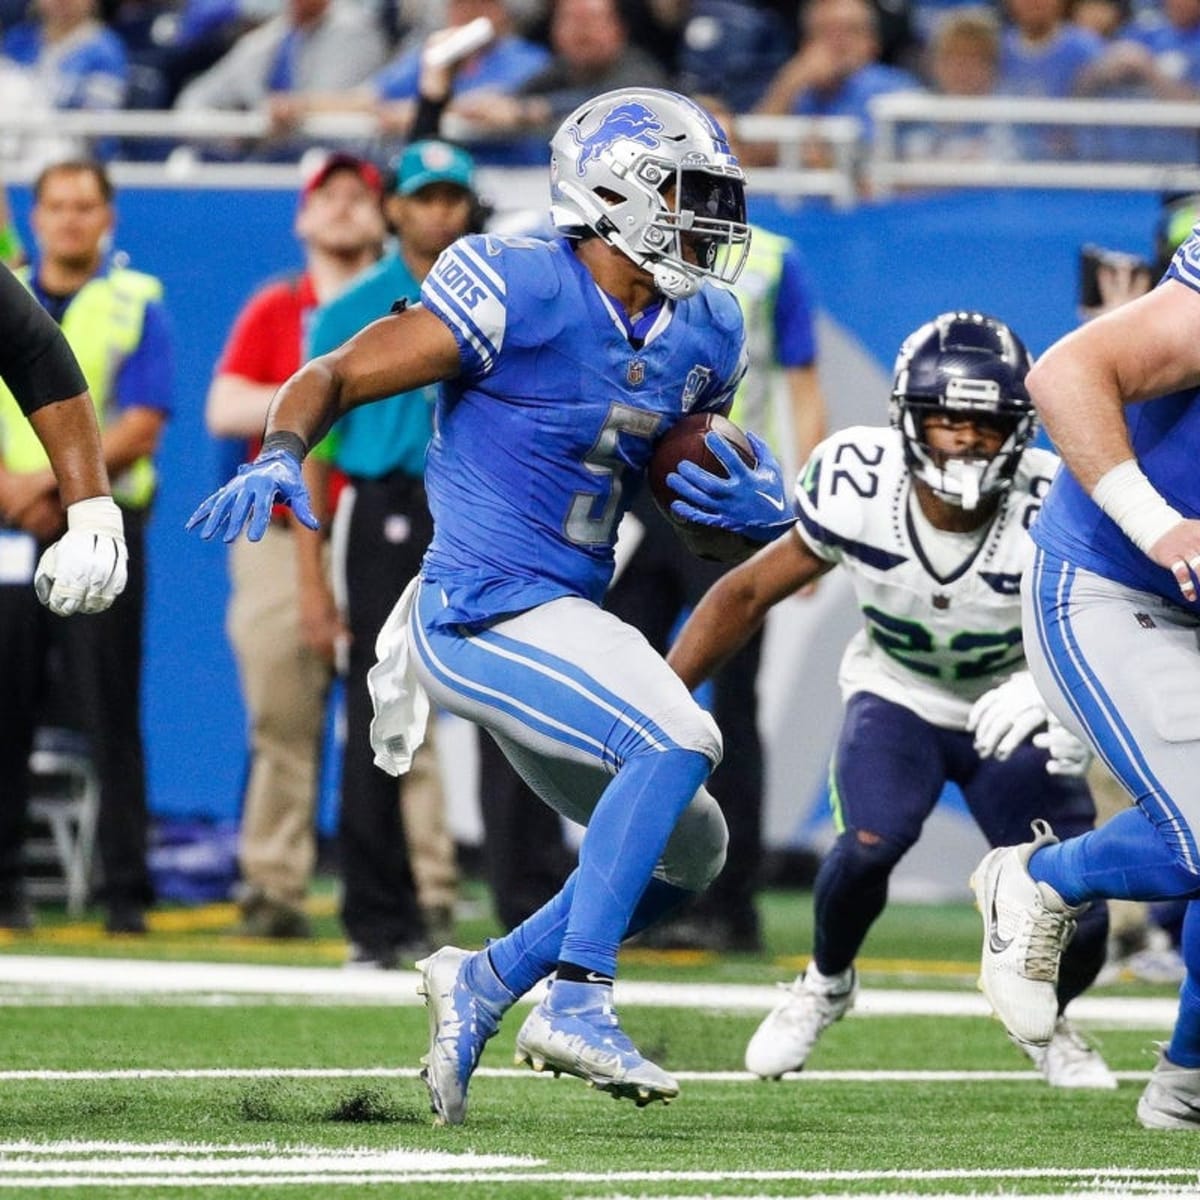 Green Bay Packers vs. Detroit Lions: Live Stream, TV Channel